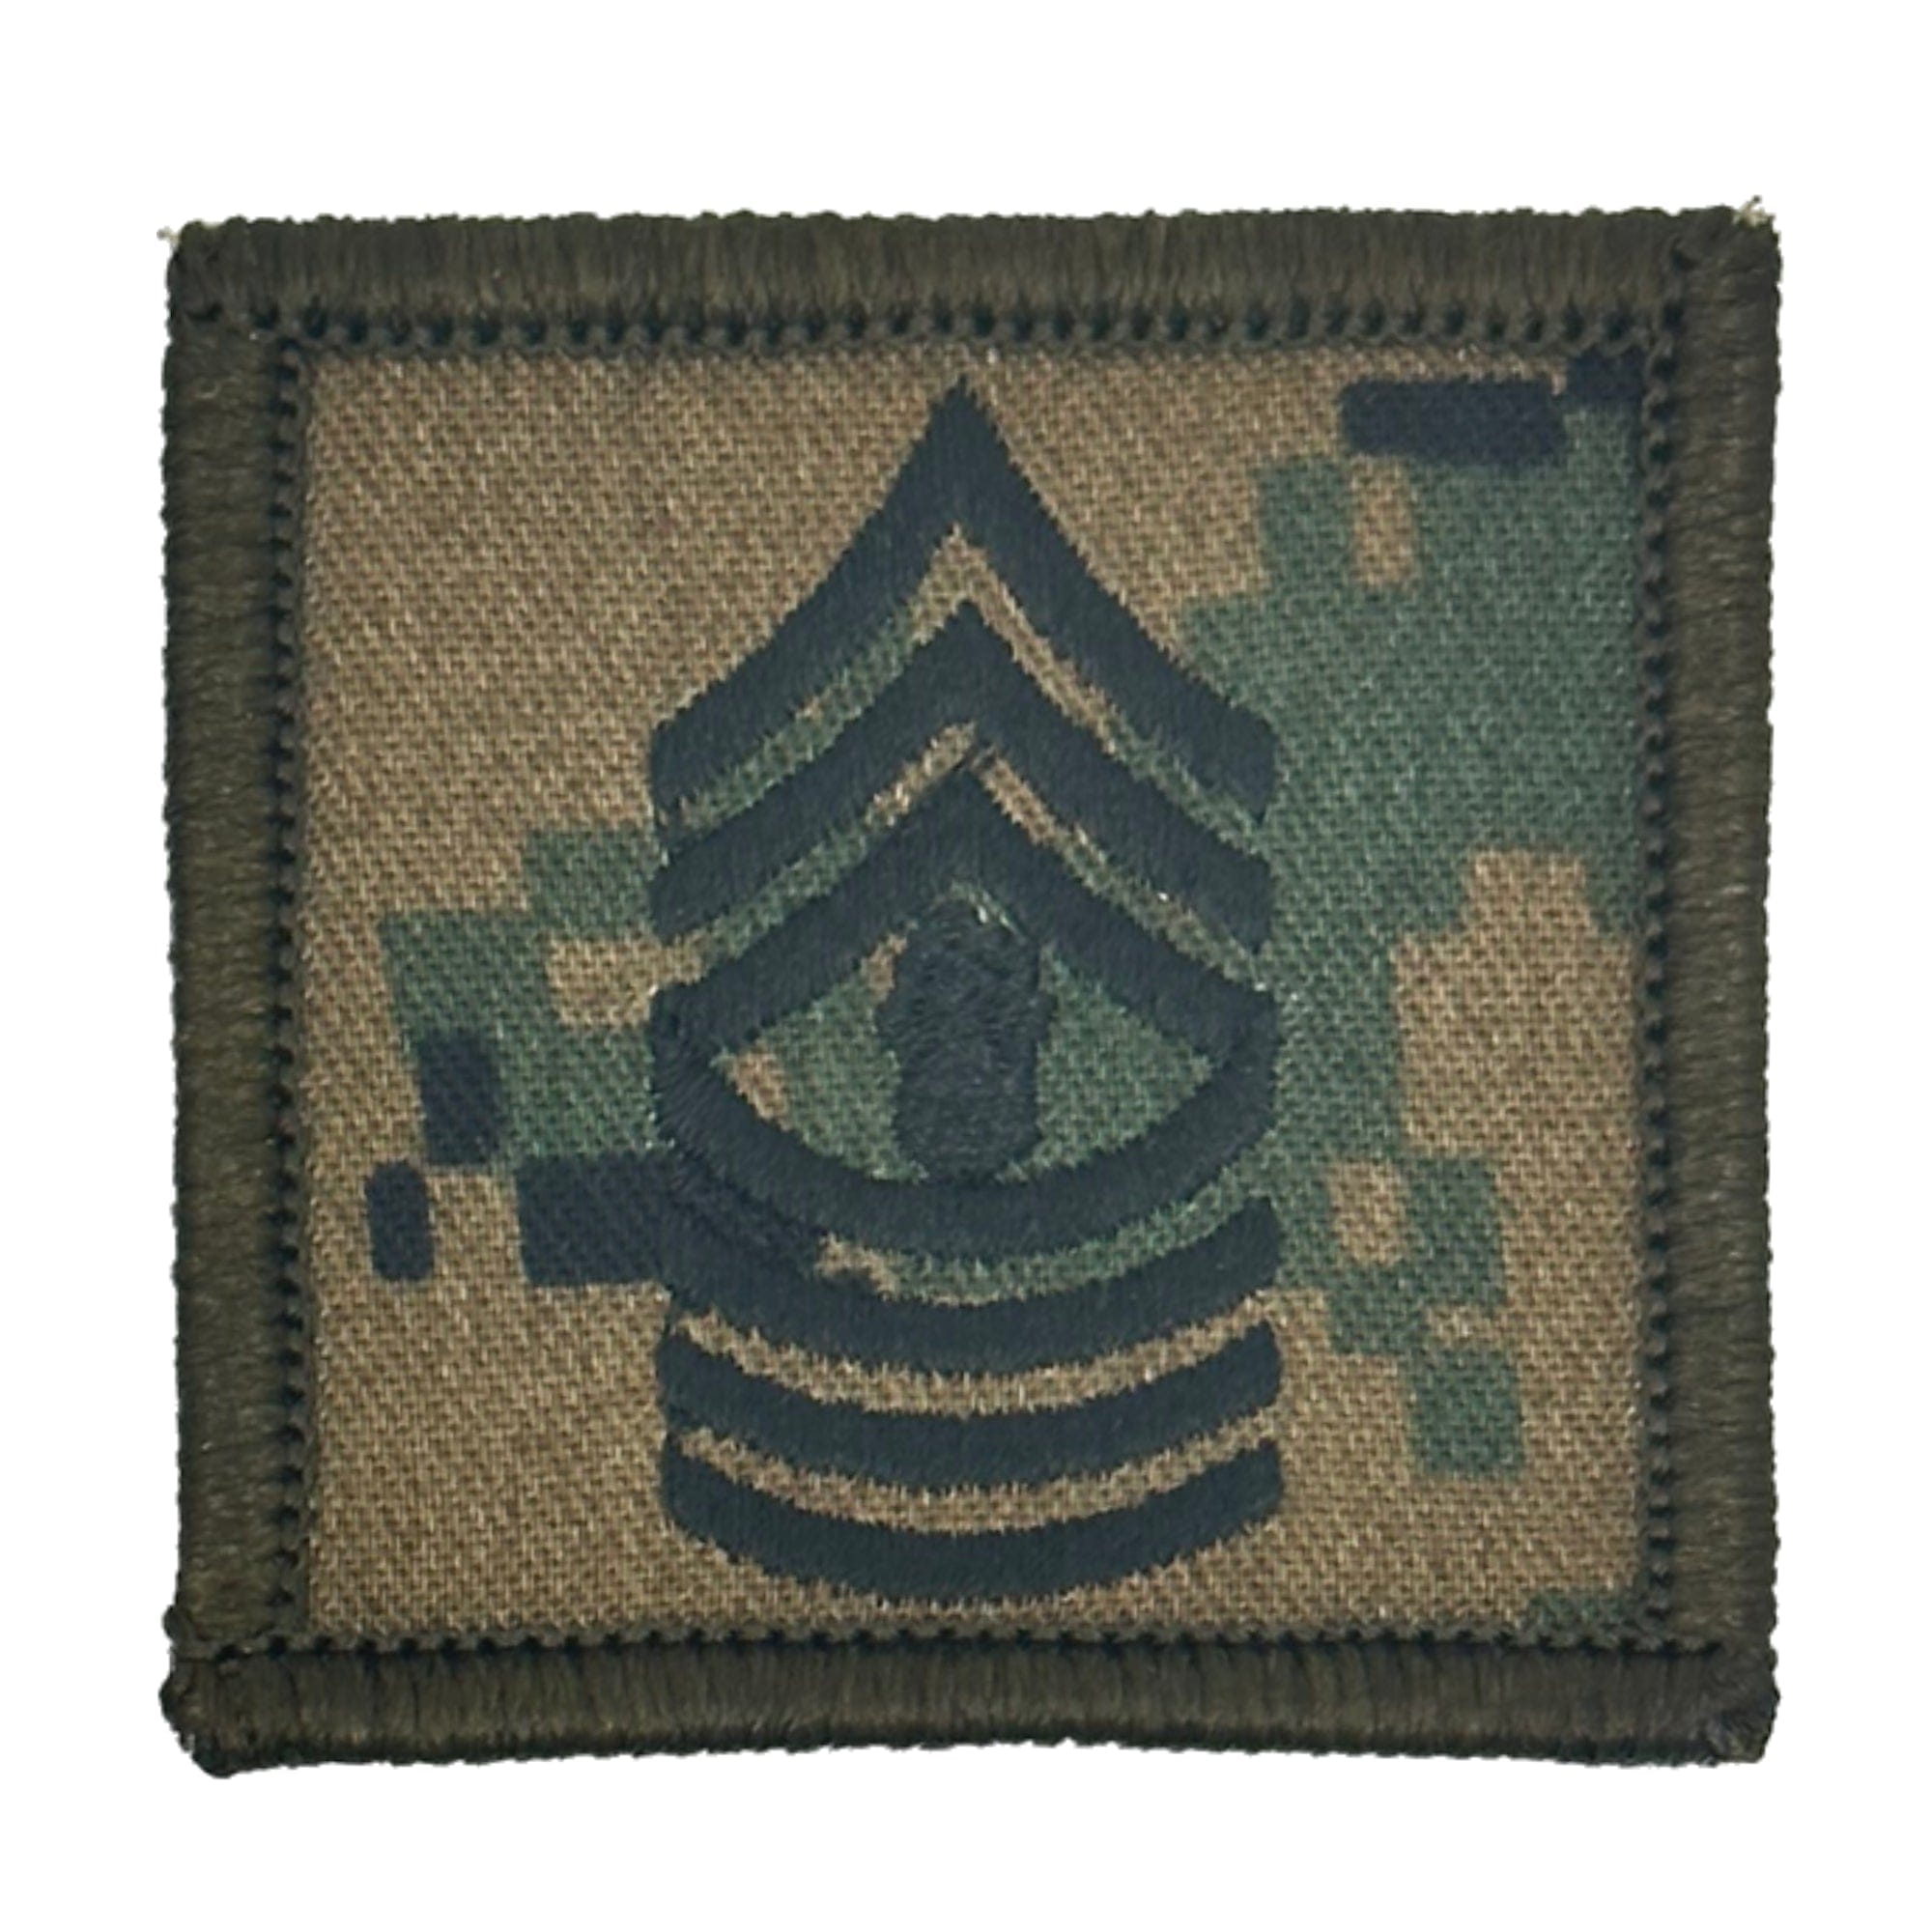 Special Operations Command USMC Patch, Specialty Patches, Marine Patches